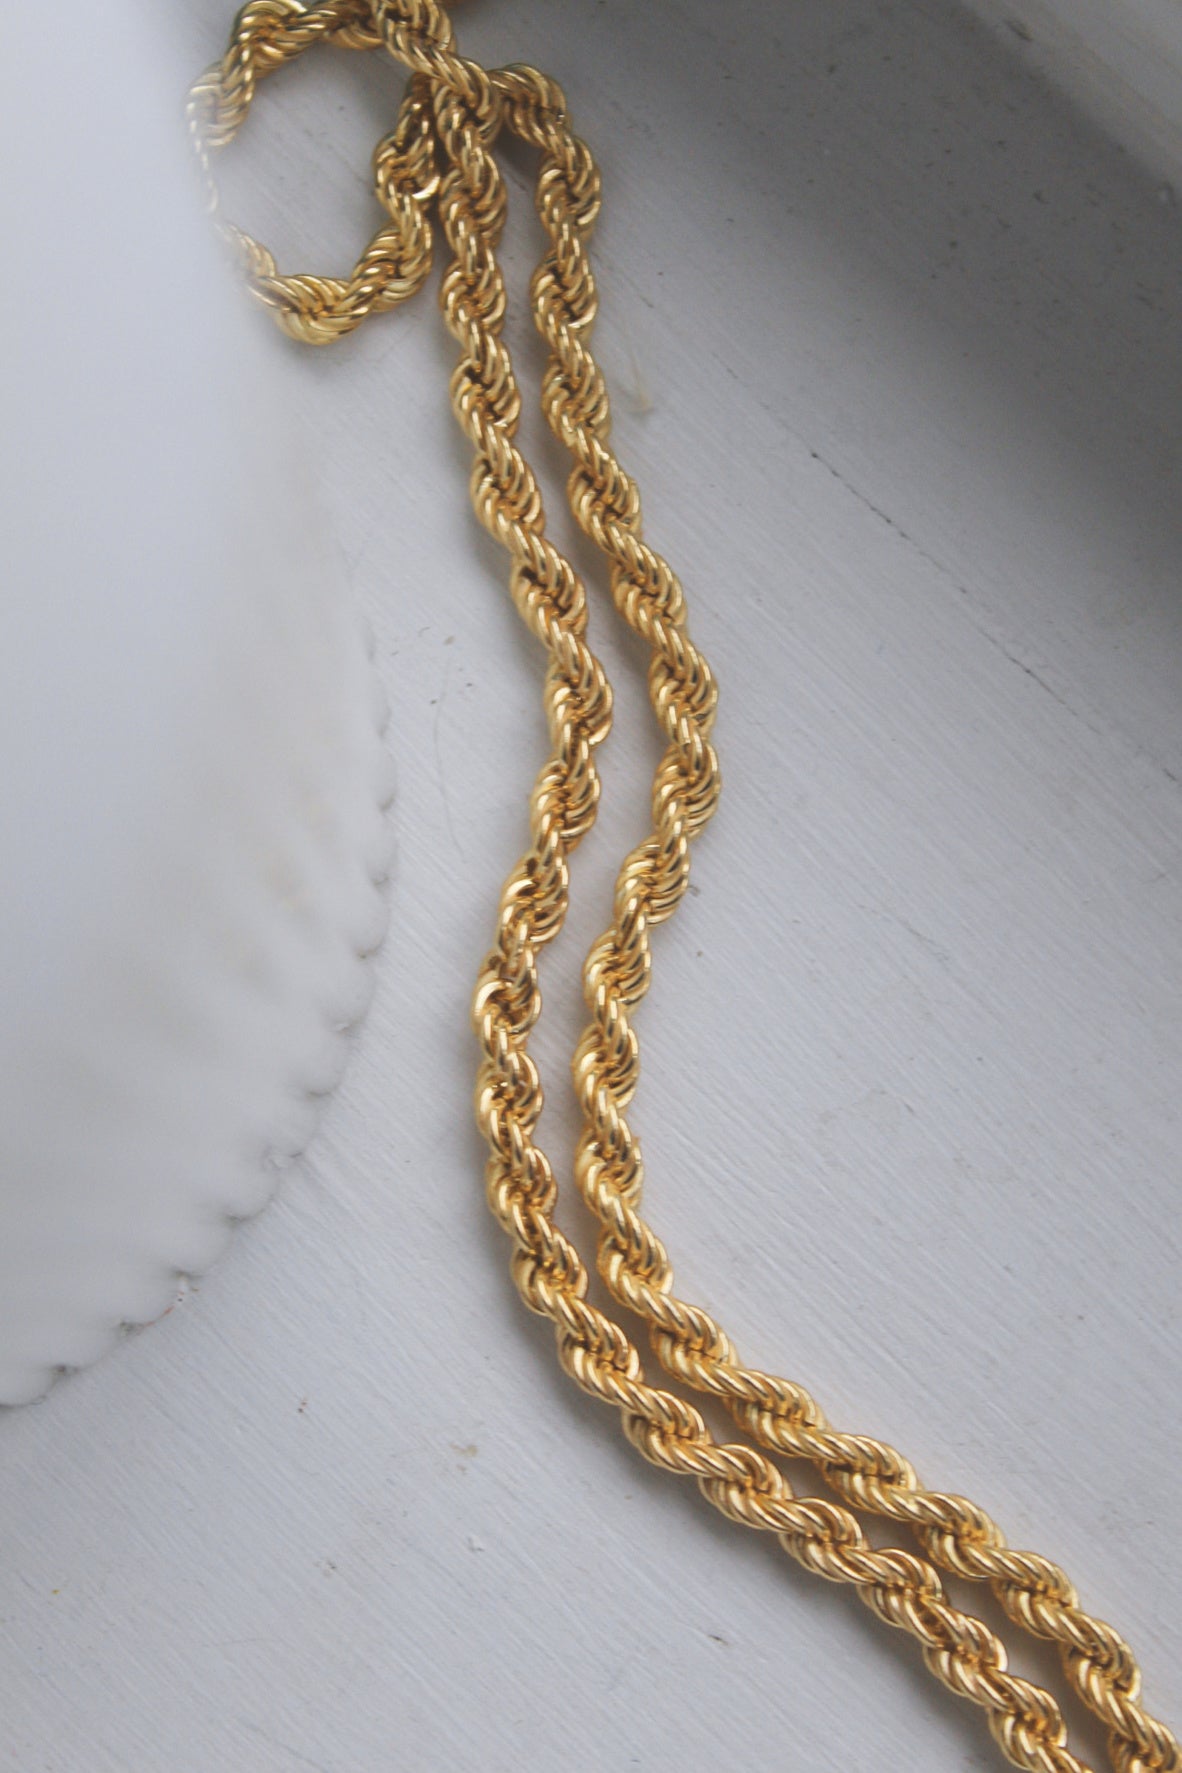 Braided Necklace 24ct Gold Plated - Jewellery Hut